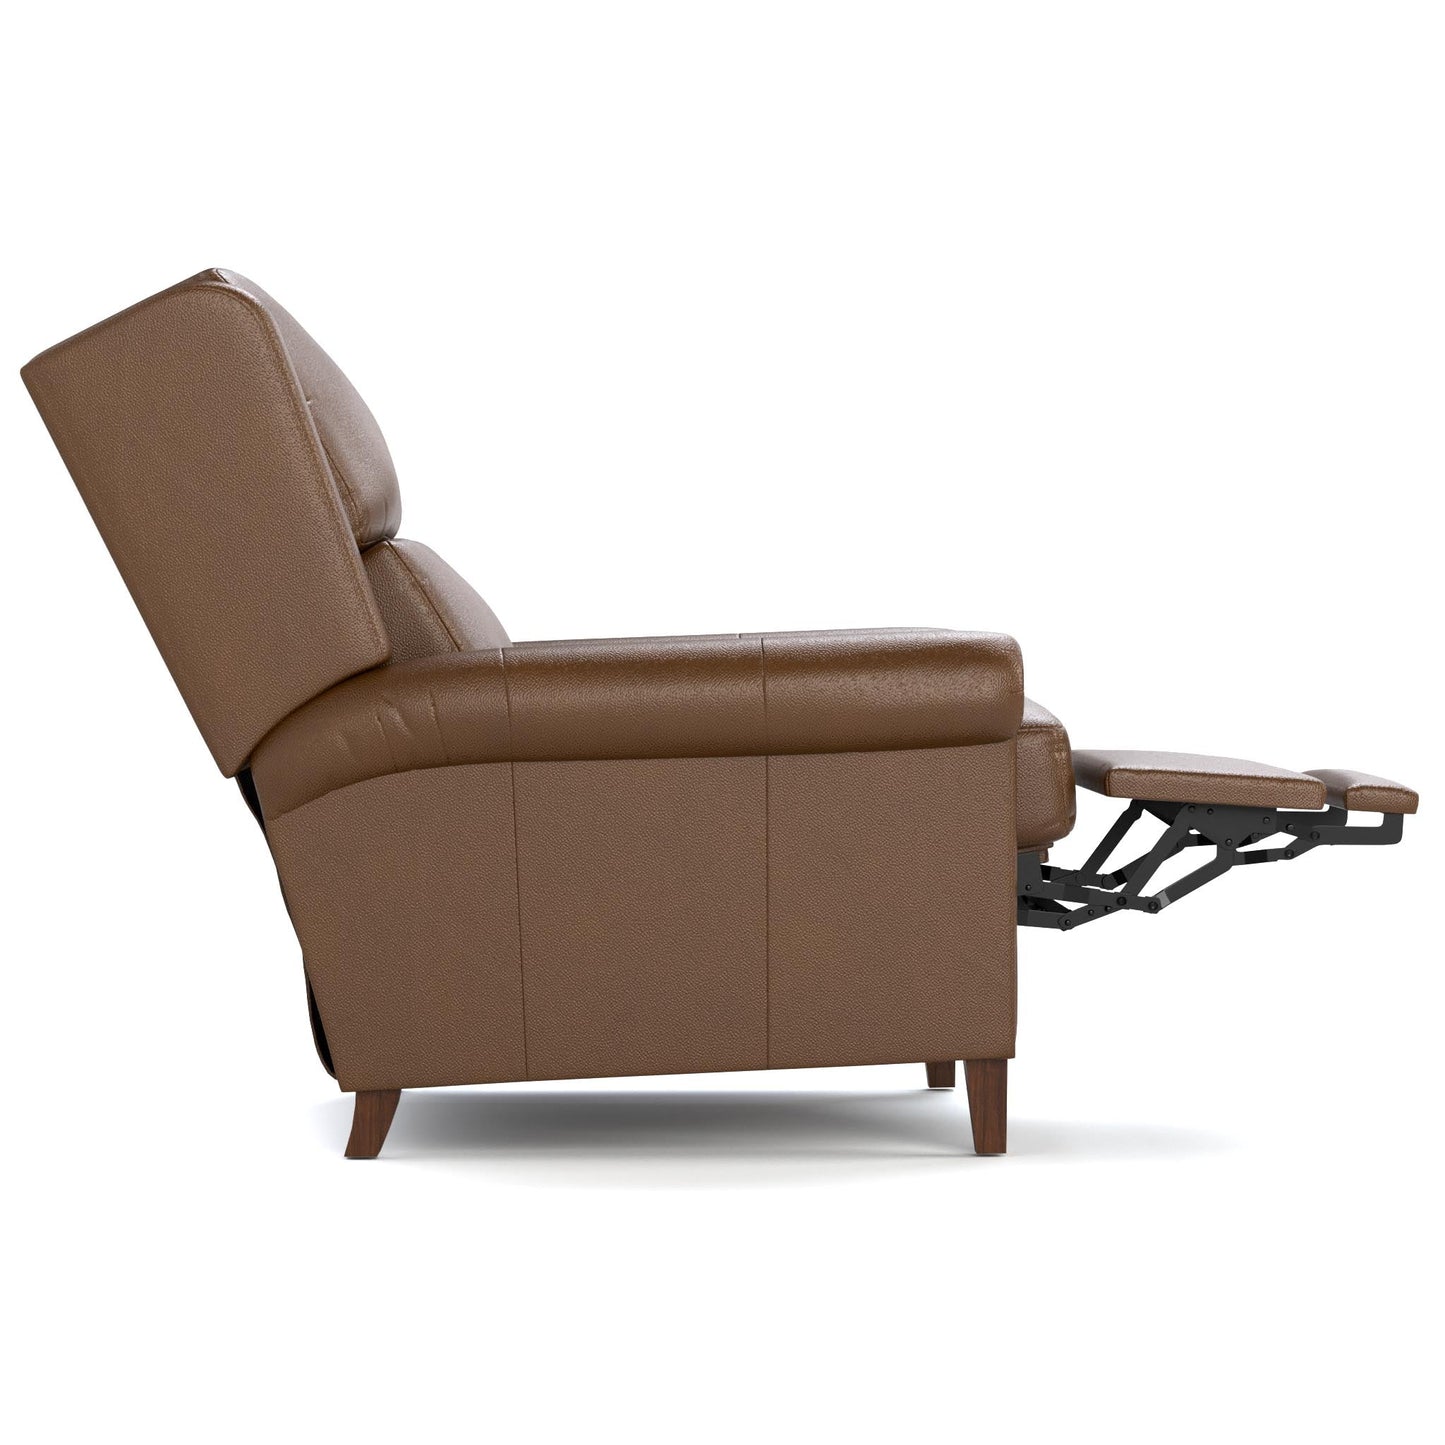 Woodlands Small Roll Arm Power Recliner Selvano Bark - Side Reclined